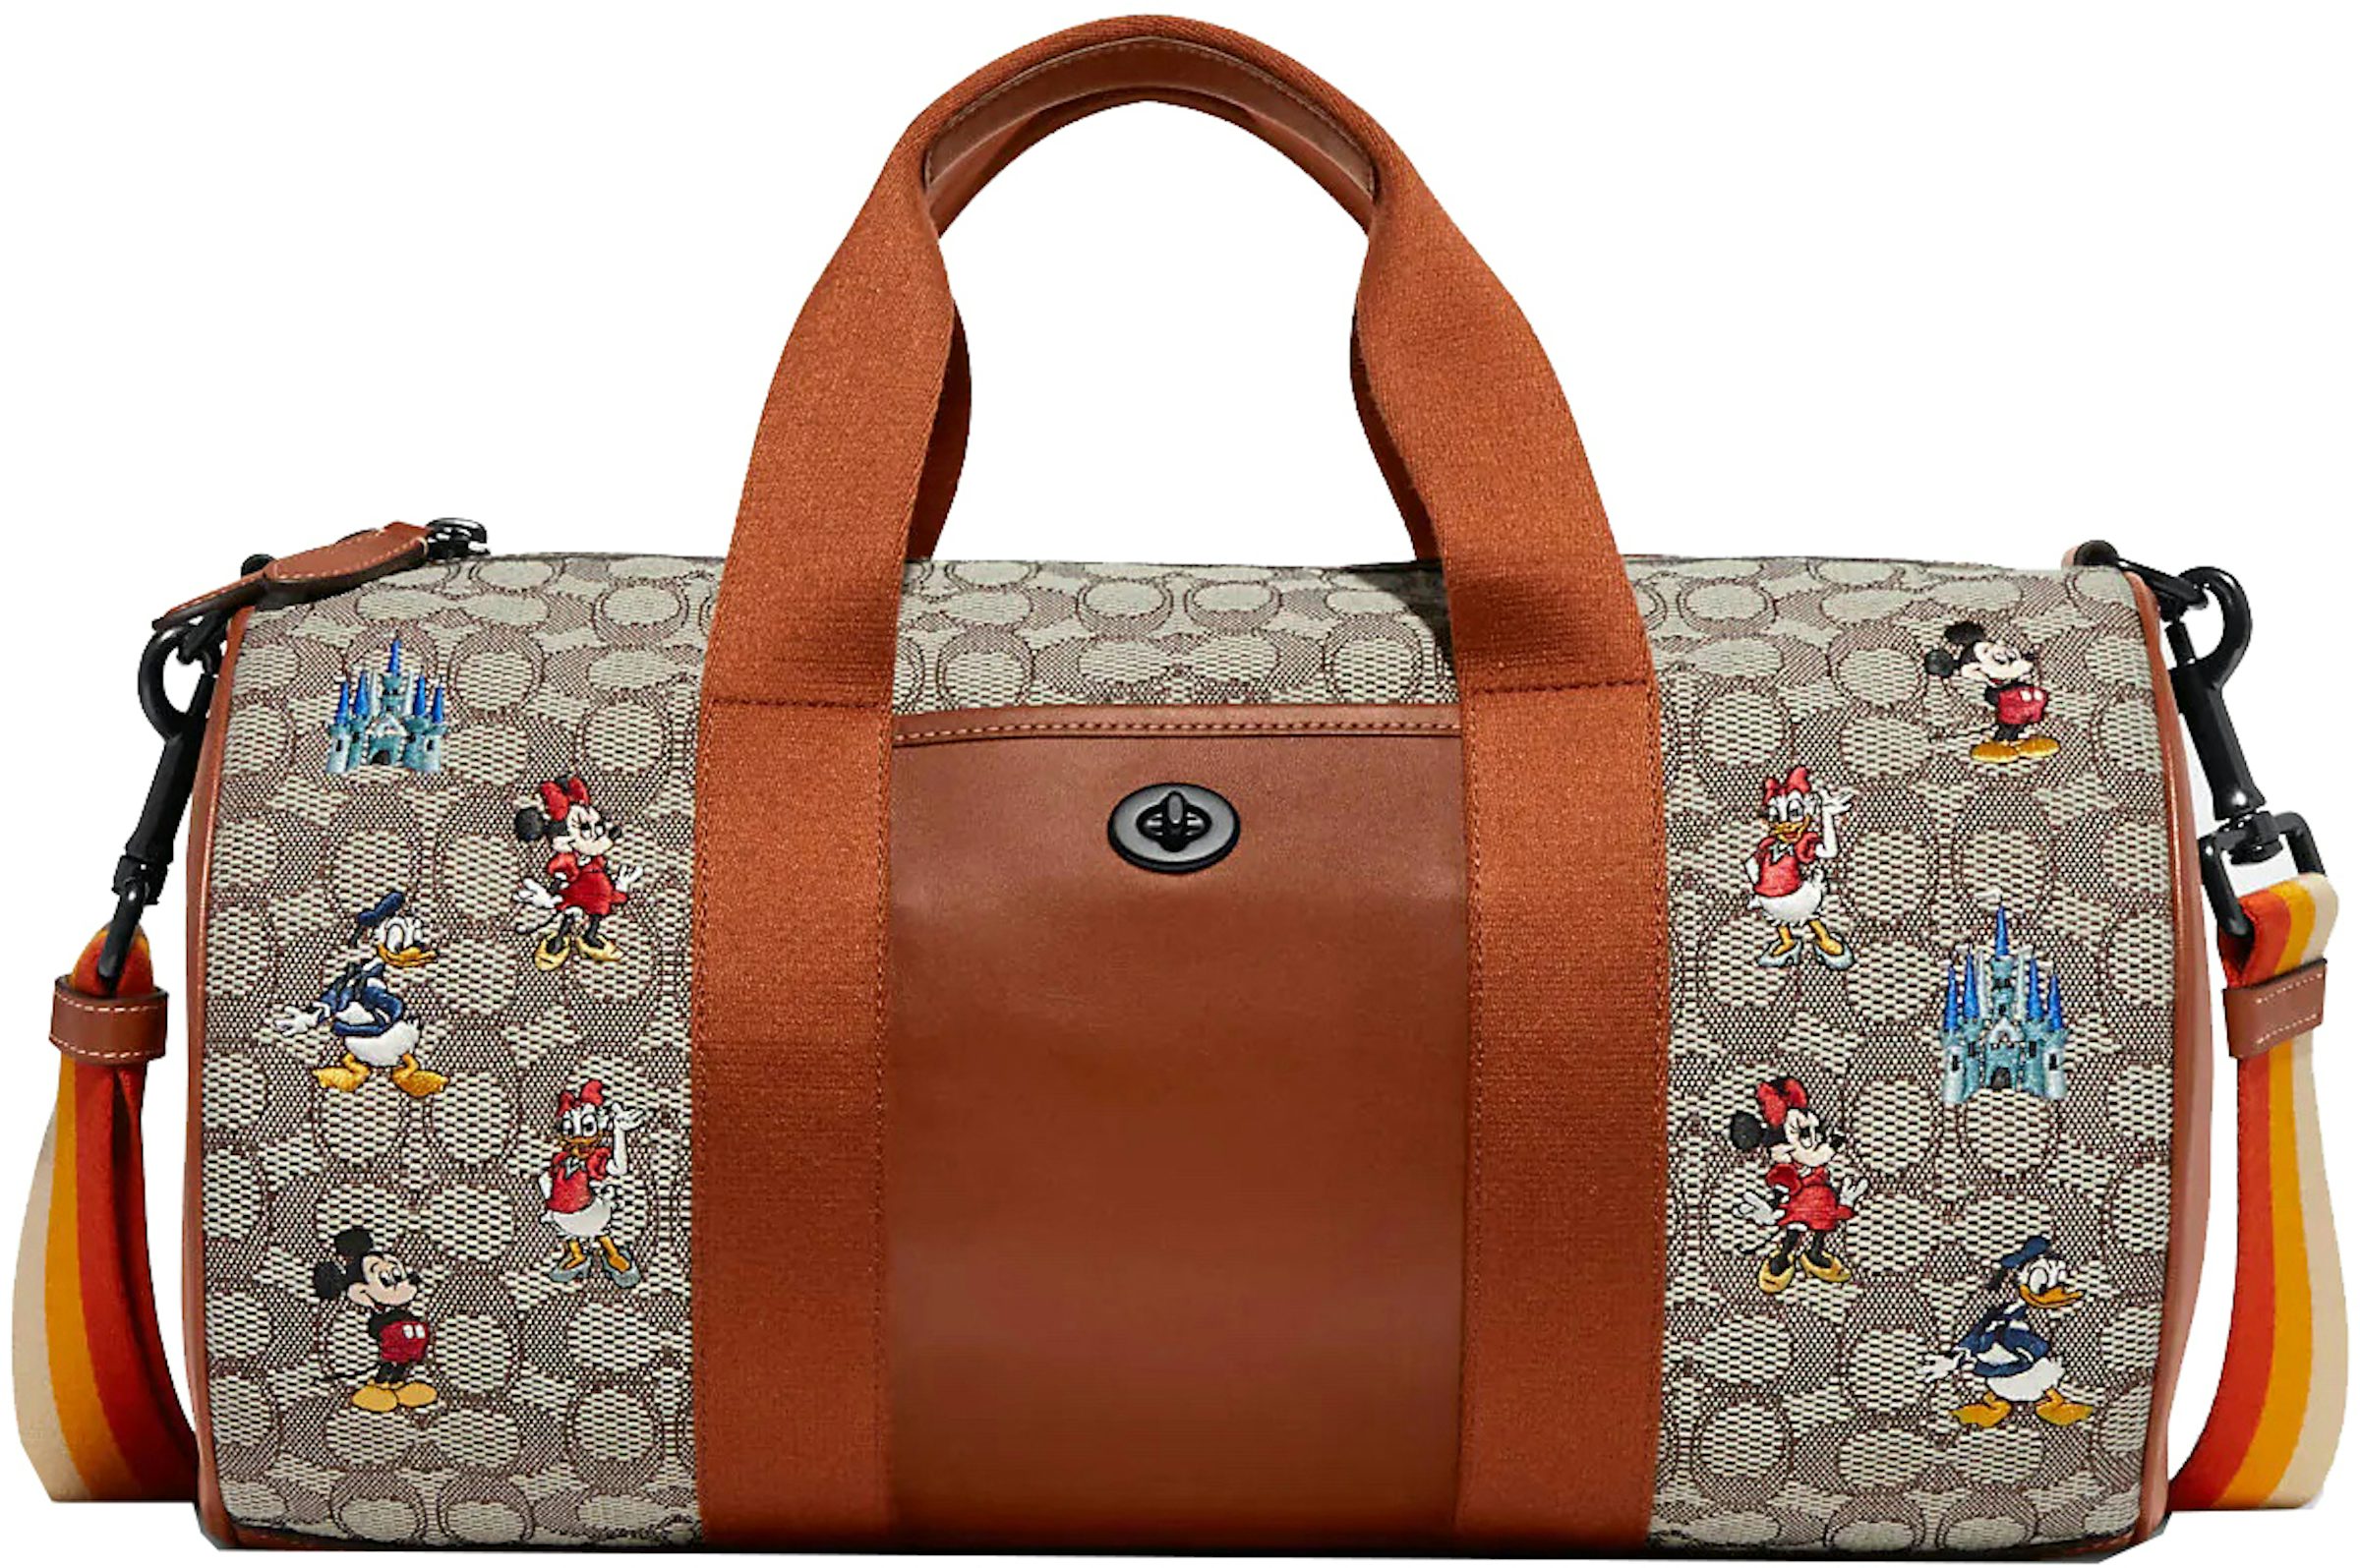 Disney X Coach 1941 Saddle Bag 23 with Mickey Mouse on Roller